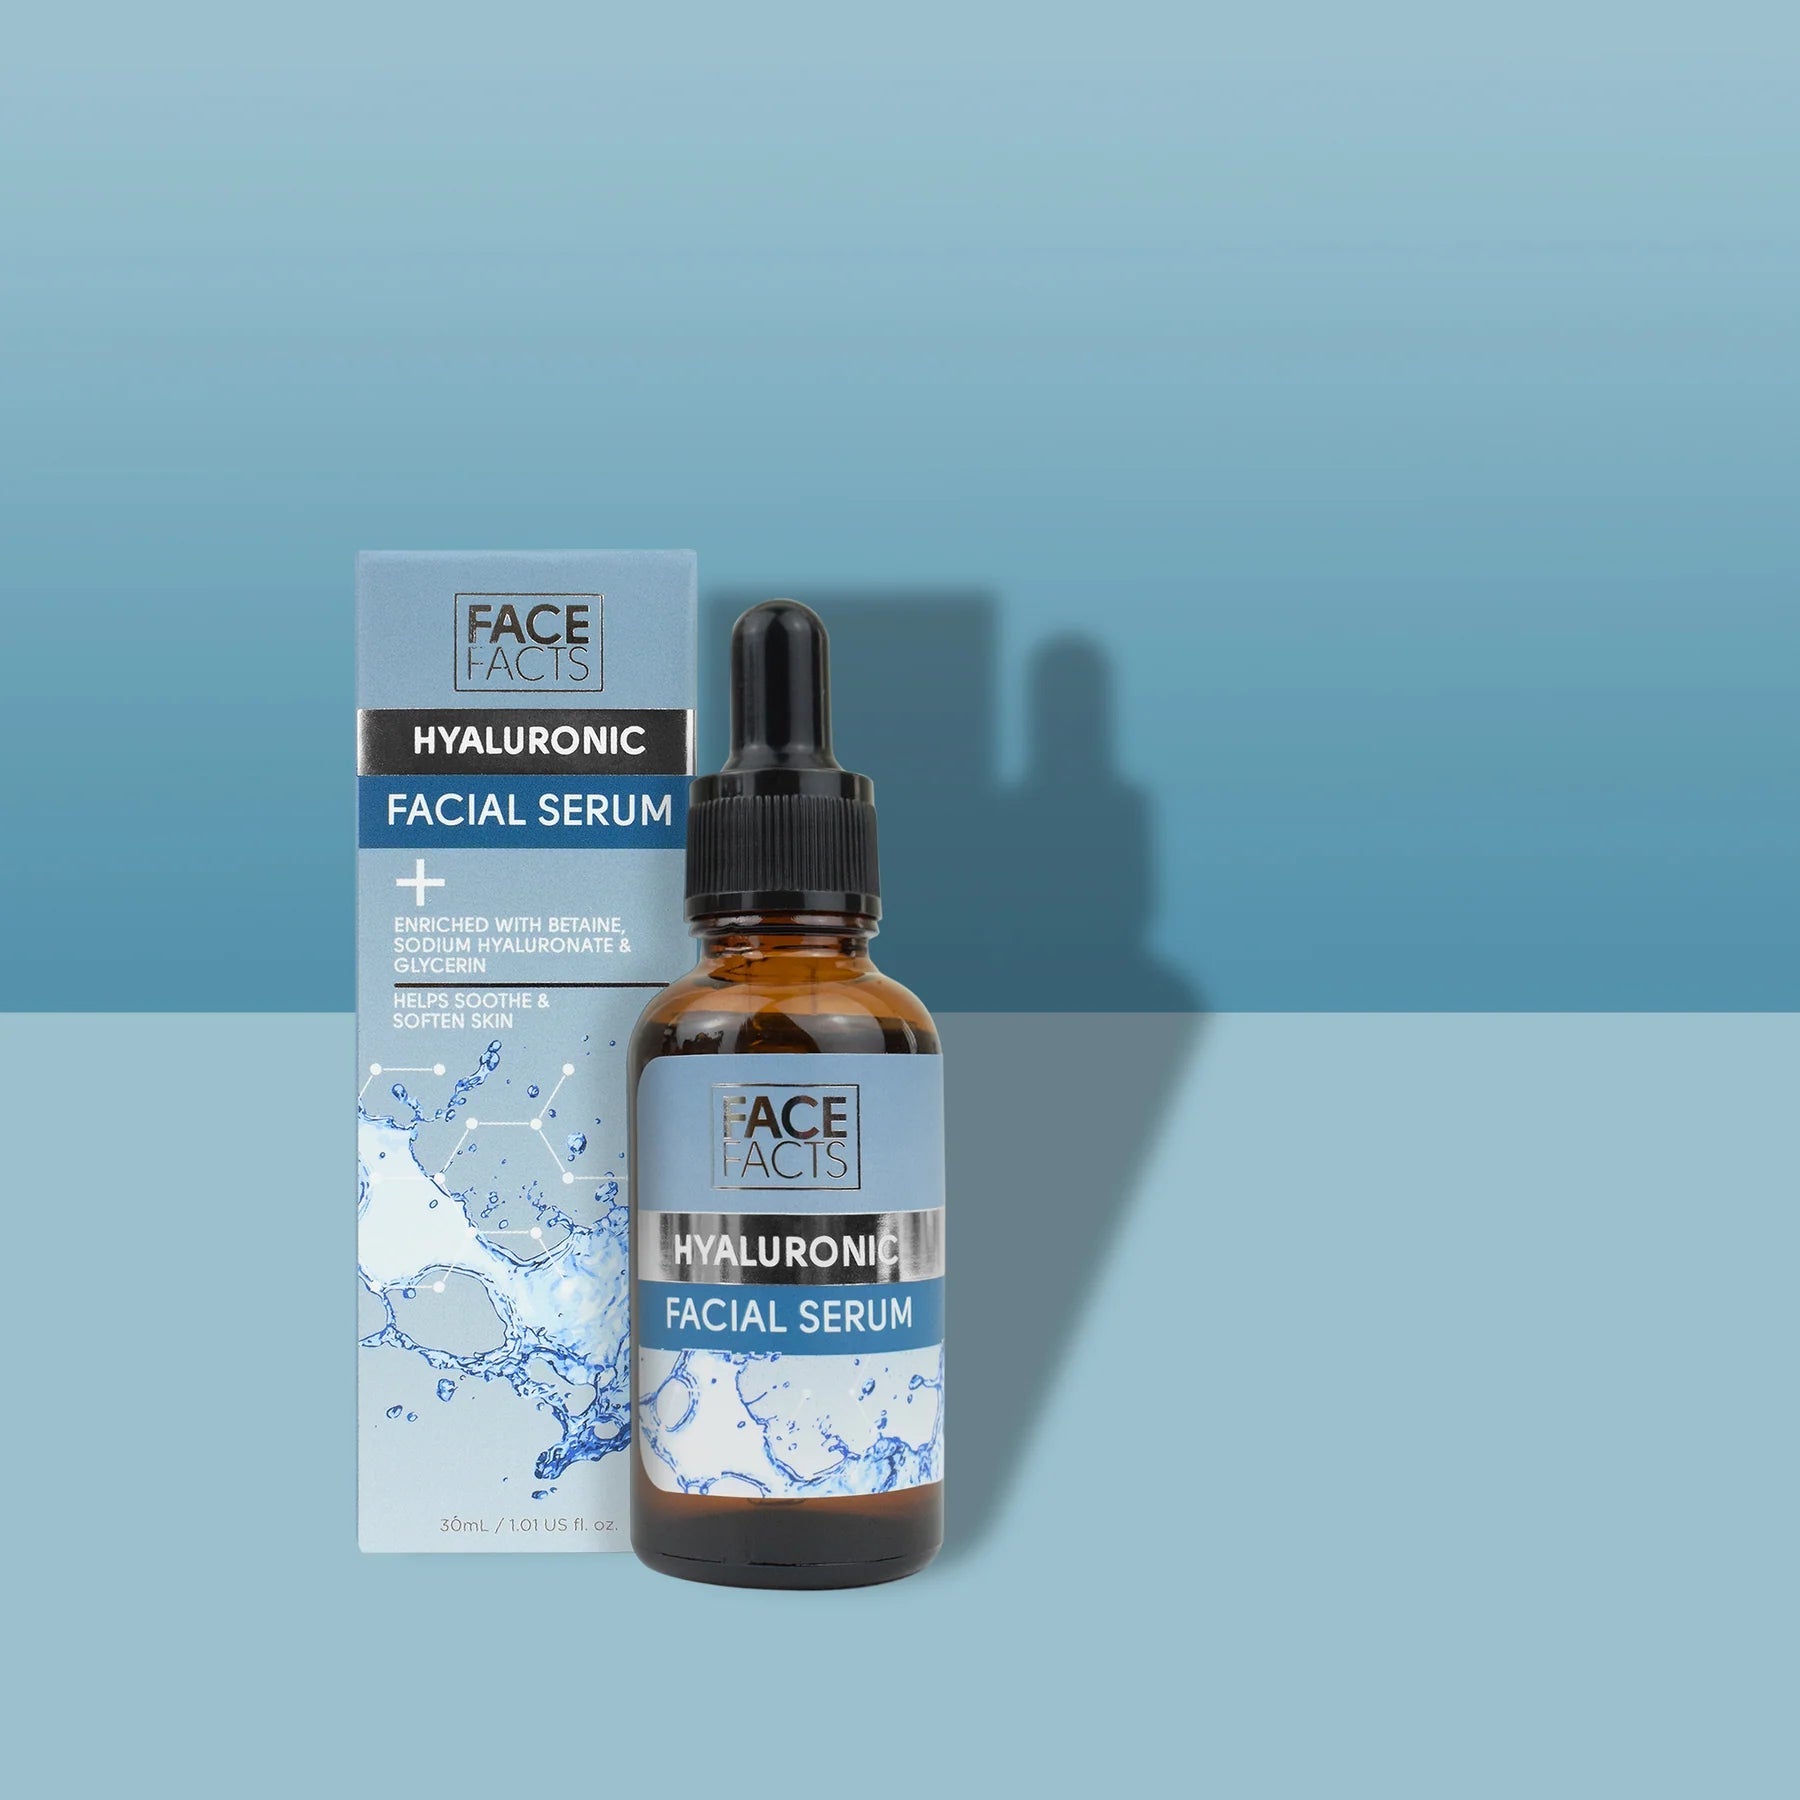 FACE FACTS HYALURONIC FACE SERUM